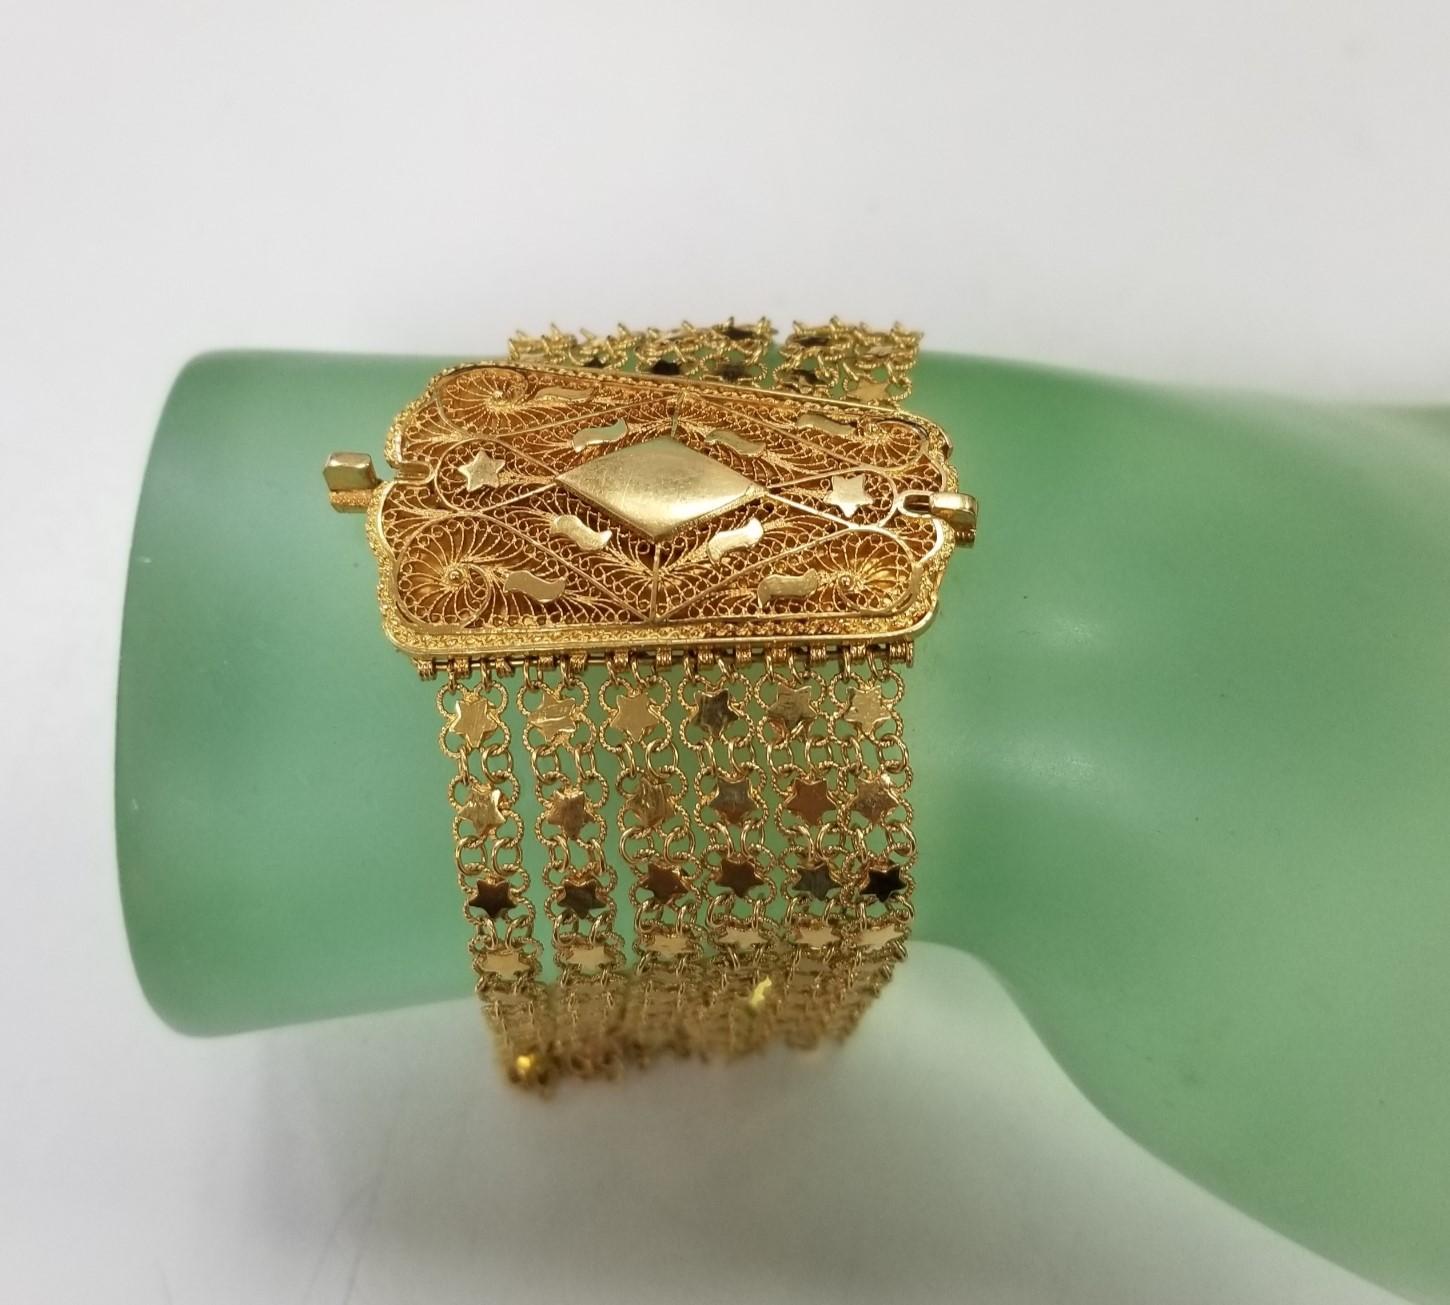 Vintage Geneve 14 Karat Yellow Gold Woven and Rope Bracelet Watch with Tassels 4